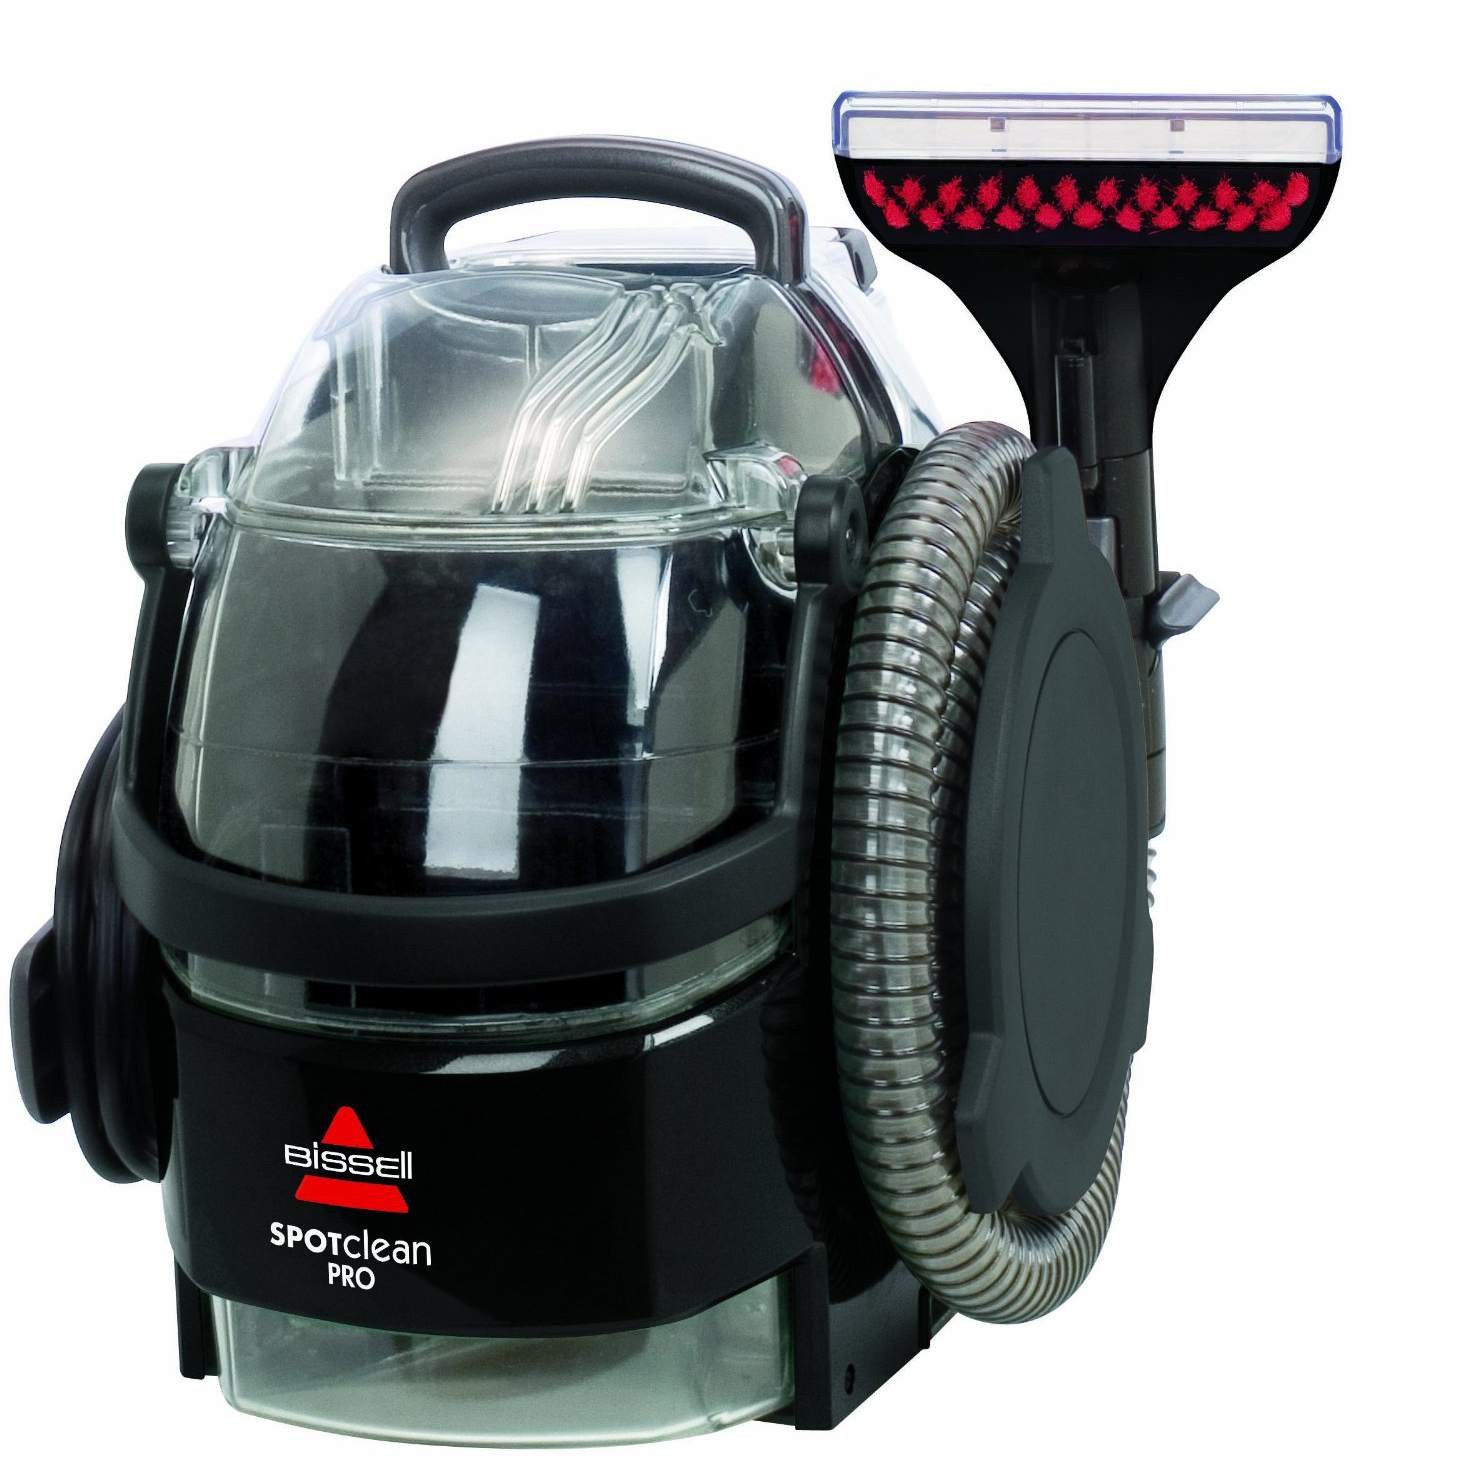 Bissell Proheat 2x Parts Diagram the 9 Best Carpet Cleaners Of 2019 Of Bissell Proheat 2x Parts Diagram